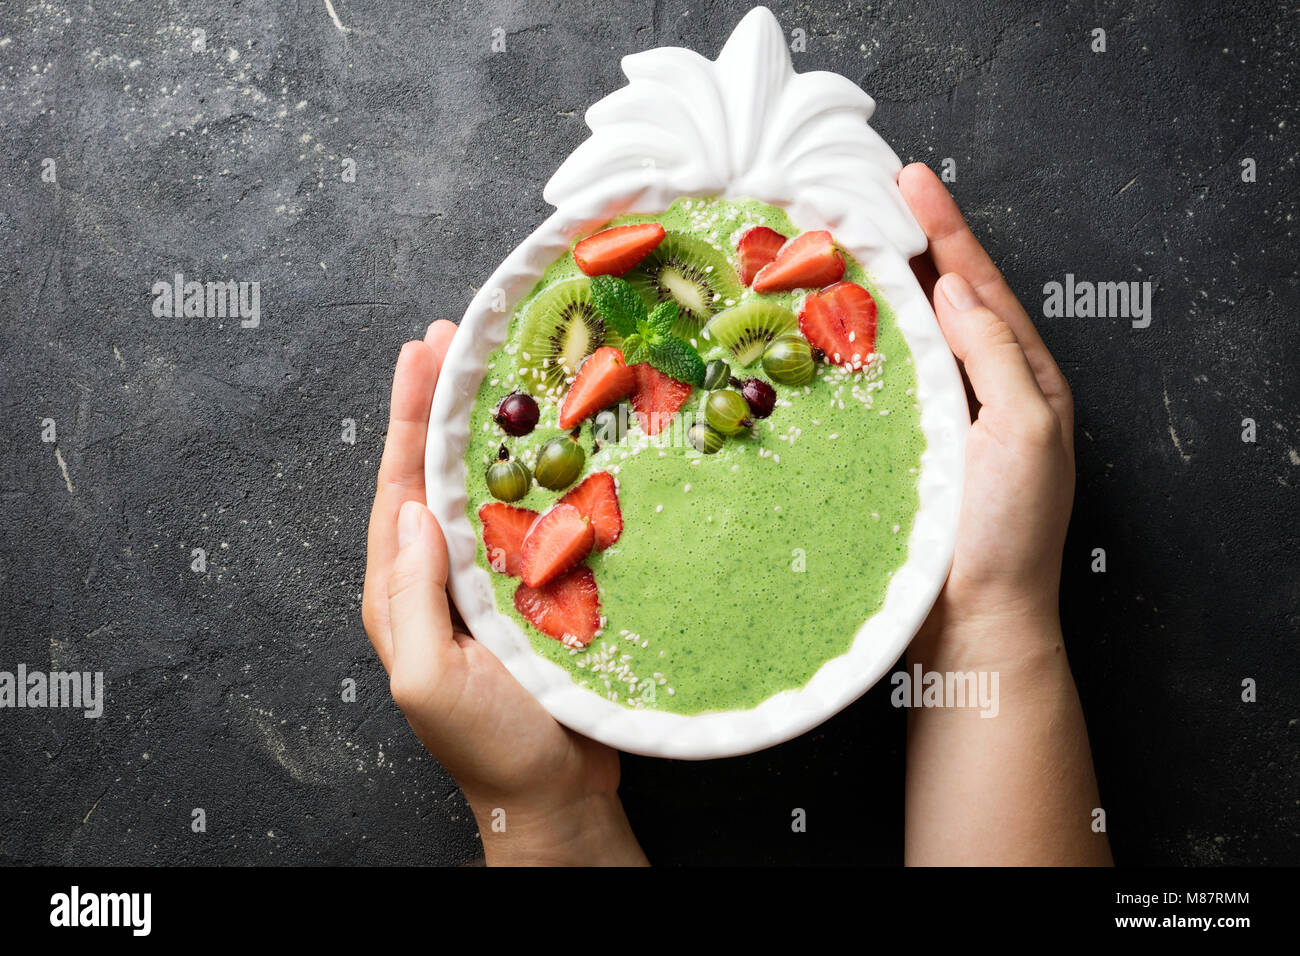 Female hands holding smoothie bowl with kiwi, spinach, strawberries and berry. Healthy eating diet concept Stock Photo